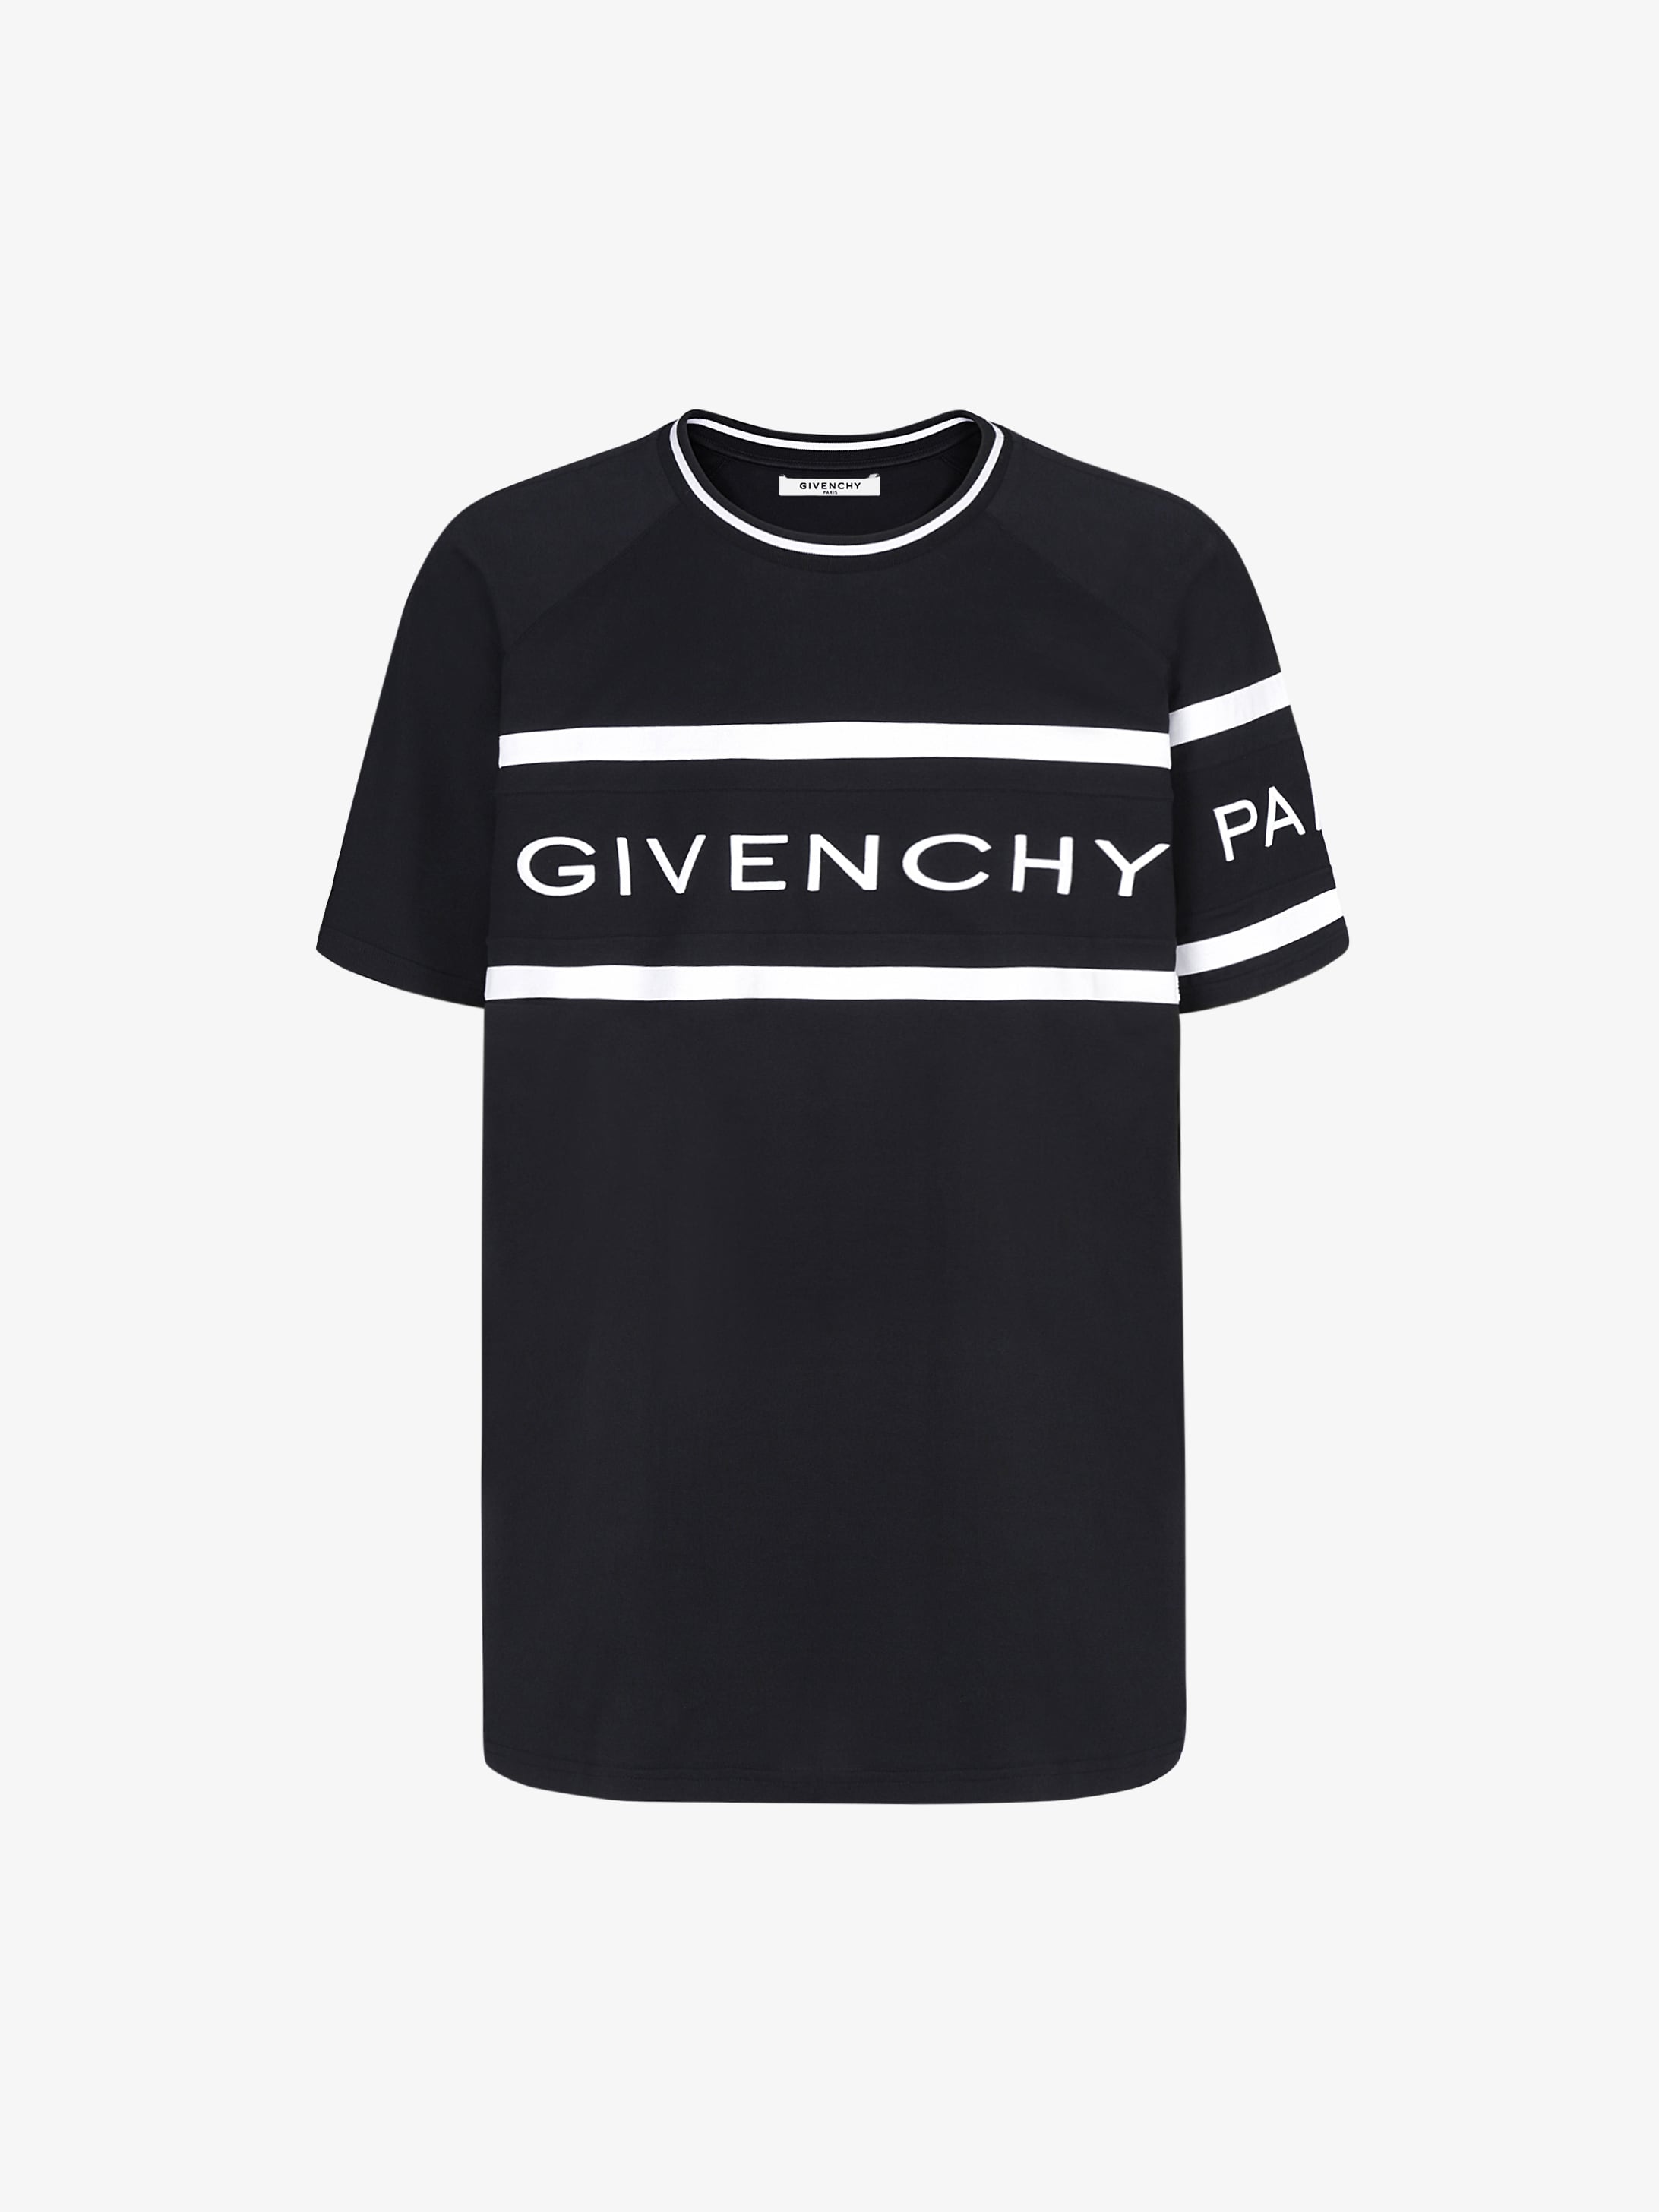 GIVENCHY 4G contrasting oversized T-shirt | GIVENCHY Paris